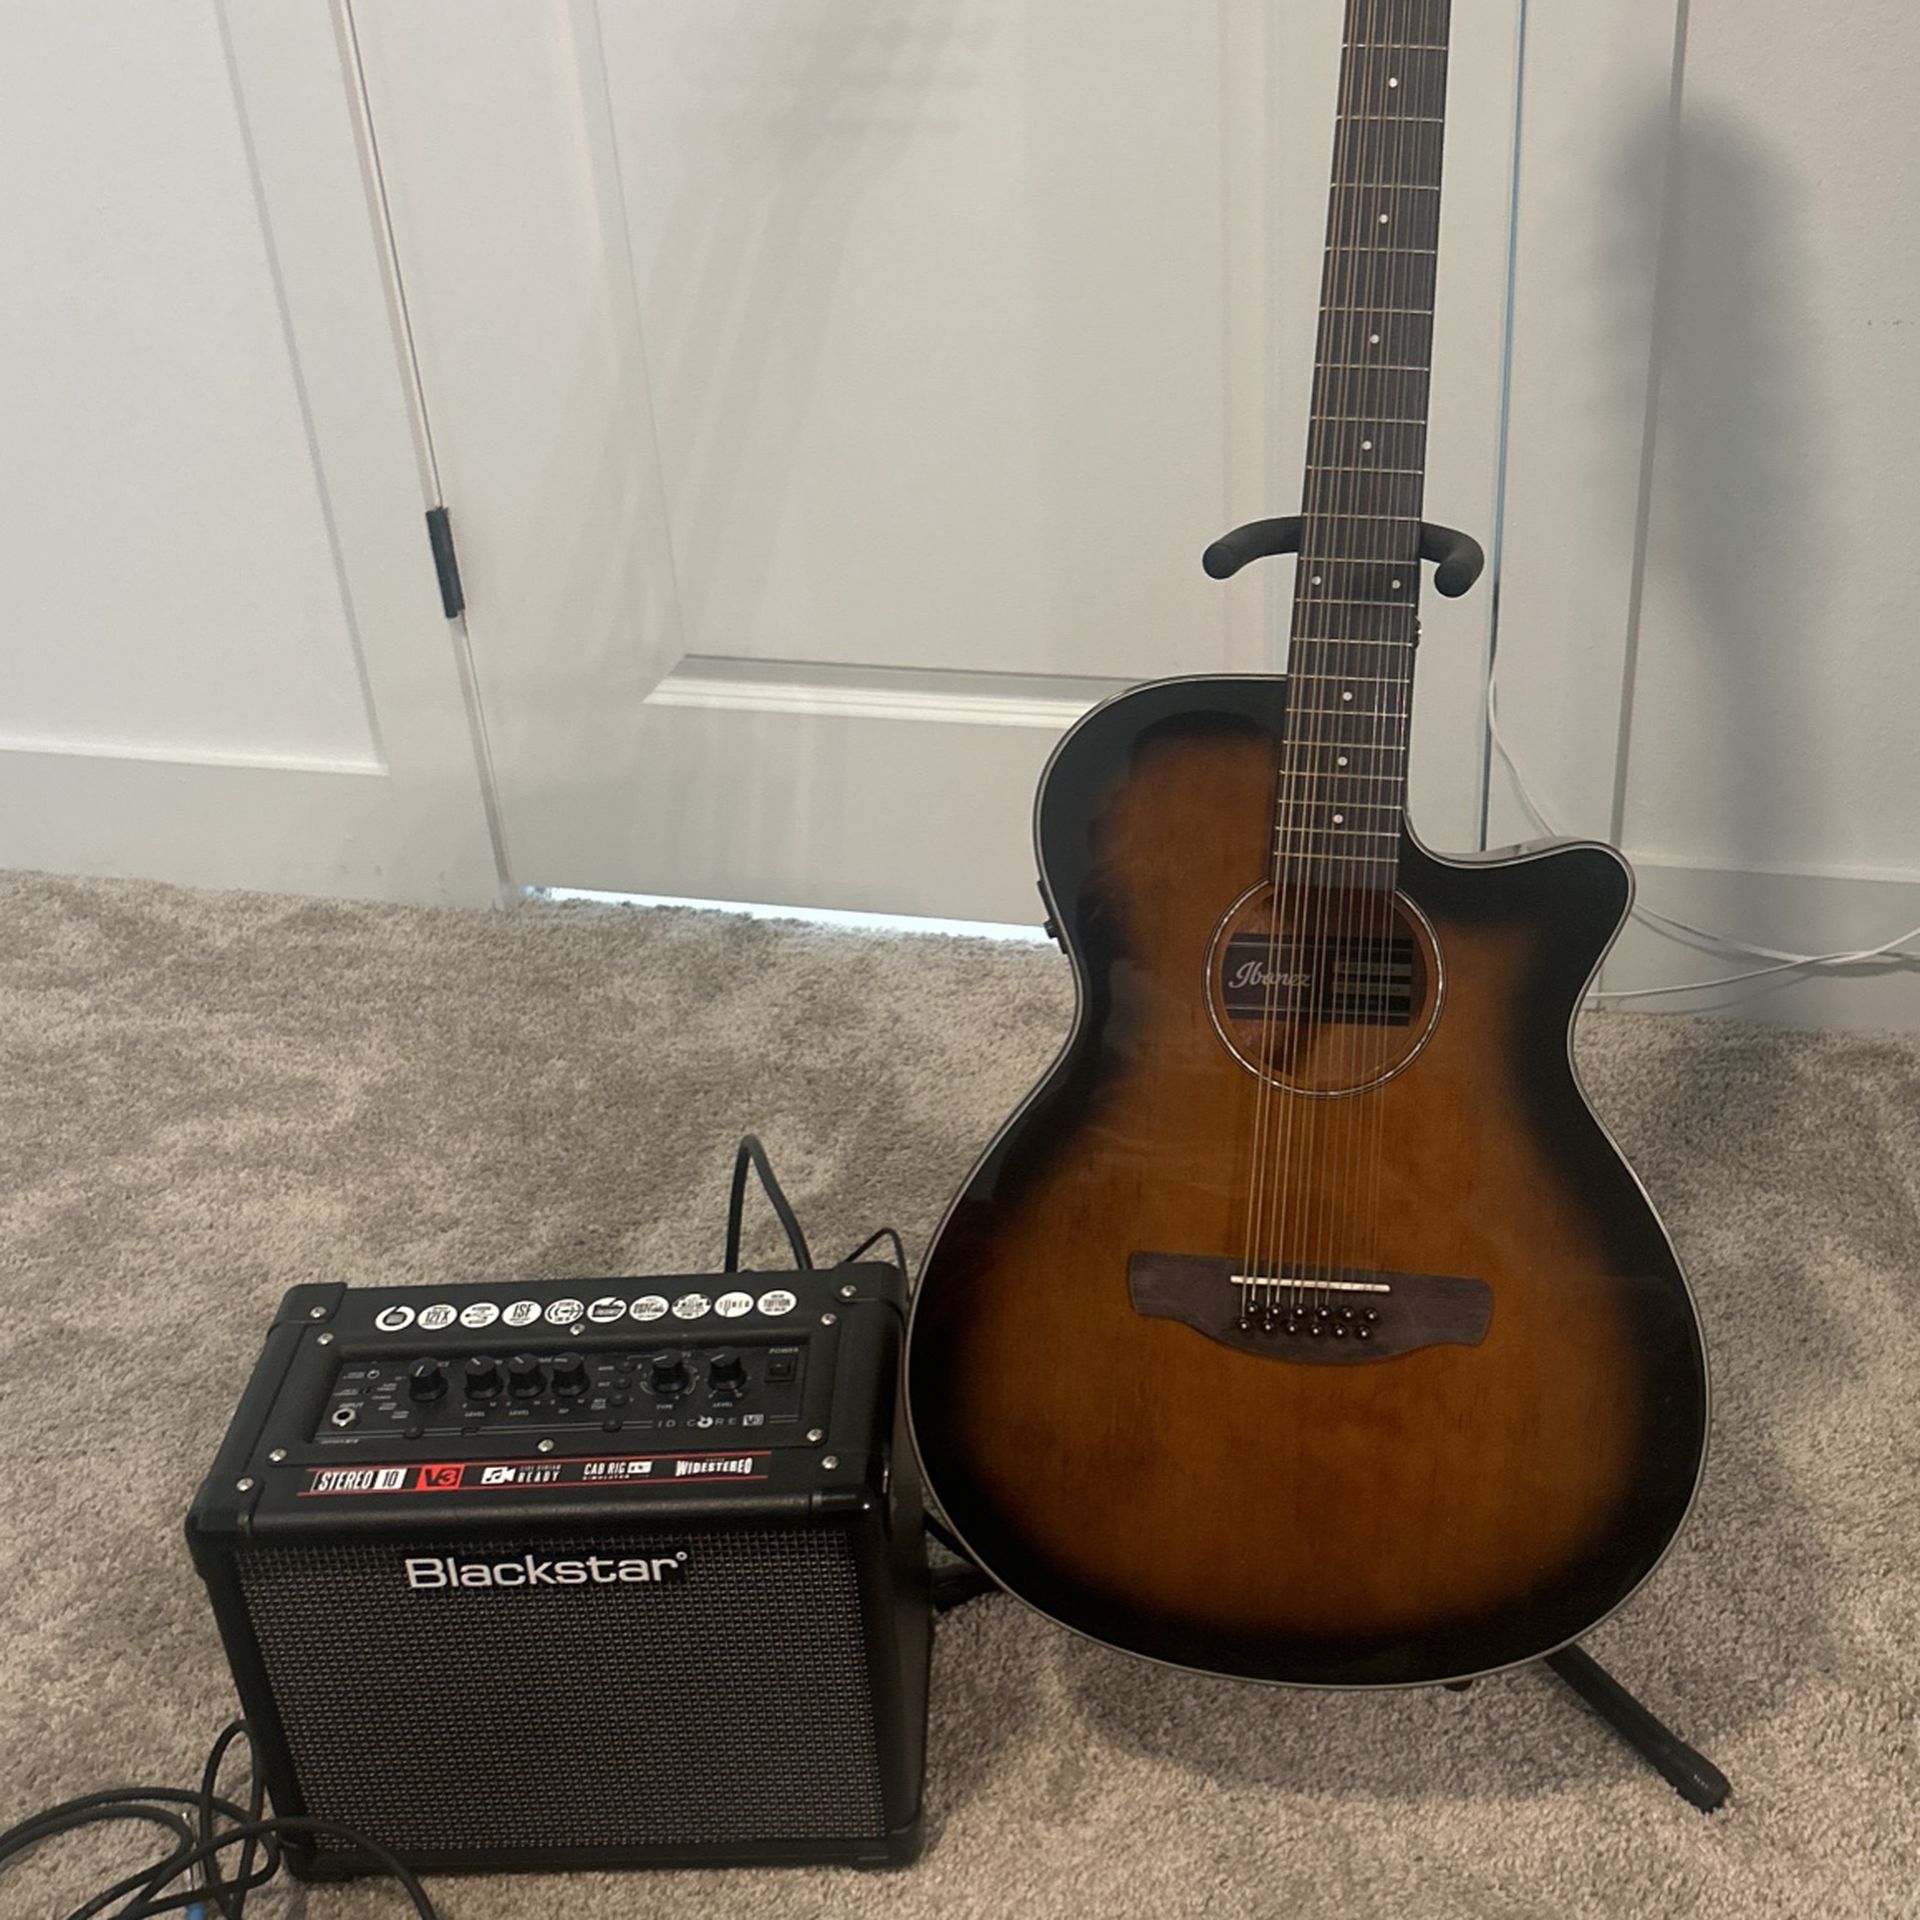 Ibanez 12 String Guitar With Blackstar Amp and Guitar Stand